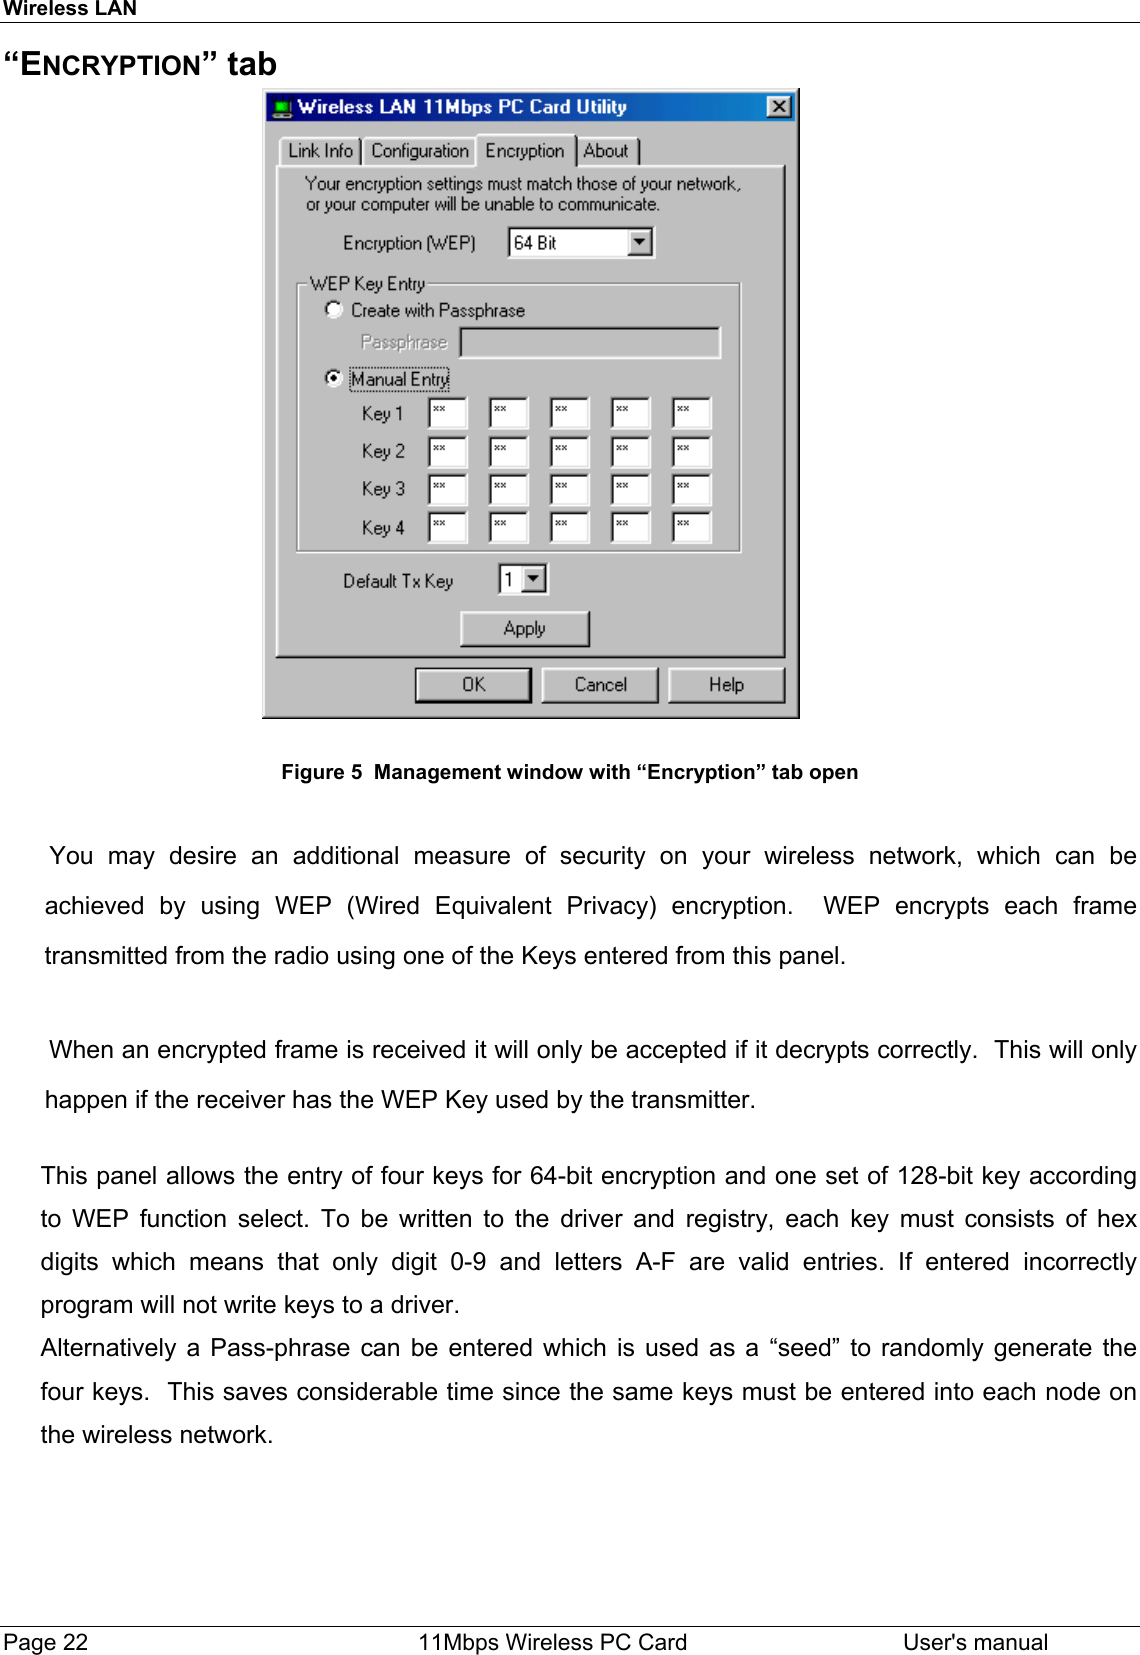 Wireless LANPage 22   11Mbps Wireless PC Card User&apos;s manual“ENCRYPTION” tab                                                        Figure 5  Management window with “Encryption” tab open You may desire an additional measure of security on your wireless network, which can beachieved by using WEP (Wired Equivalent Privacy) encryption.  WEP encrypts each frametransmitted from the radio using one of the Keys entered from this panel.When an encrypted frame is received it will only be accepted if it decrypts correctly.  This will onlyhappen if the receiver has the WEP Key used by the transmitter.This panel allows the entry of four keys for 64-bit encryption and one set of 128-bit key accordingto WEP function select. To be written to the driver and registry, each key must consists of hexdigits which means that only digit 0-9 and letters A-F are valid entries. If entered incorrectlyprogram will not write keys to a driver.Alternatively a Pass-phrase can be entered which is used as a “seed” to randomly generate thefour keys.  This saves considerable time since the same keys must be entered into each node onthe wireless network.